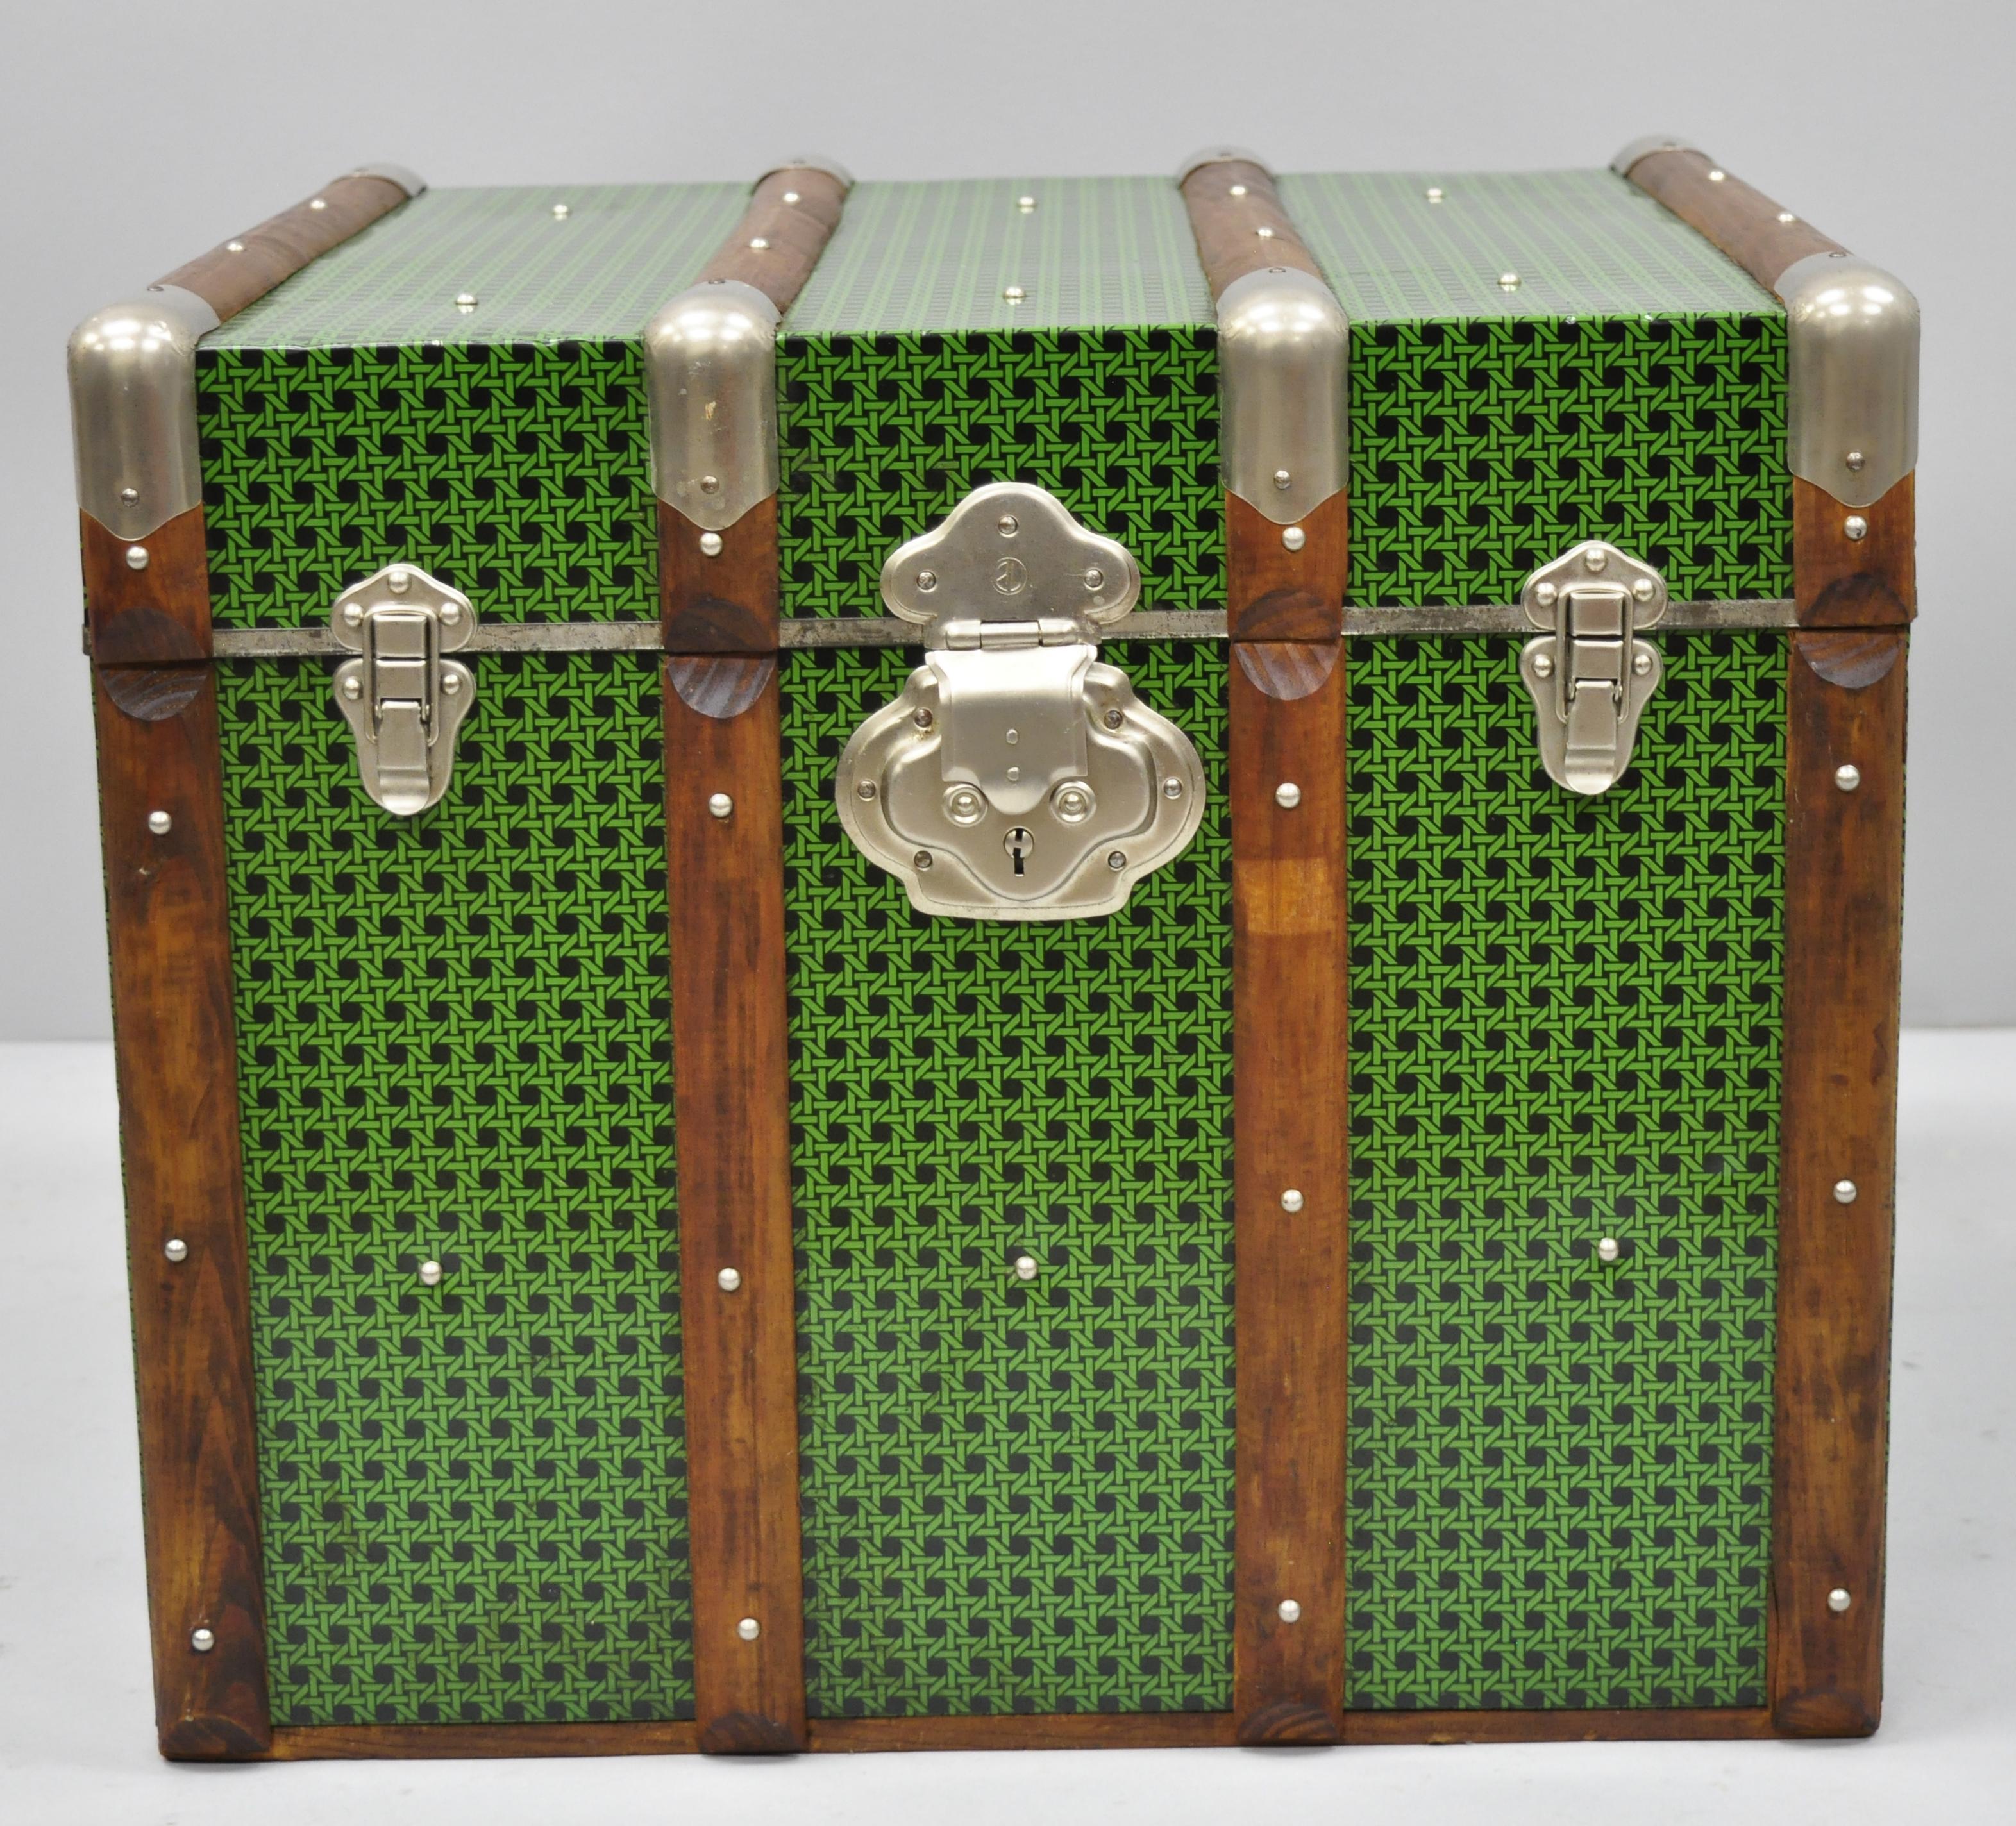 Vintage wood tin metal wrapped green faux cane rattan wicker chest trunk box. Item features green 